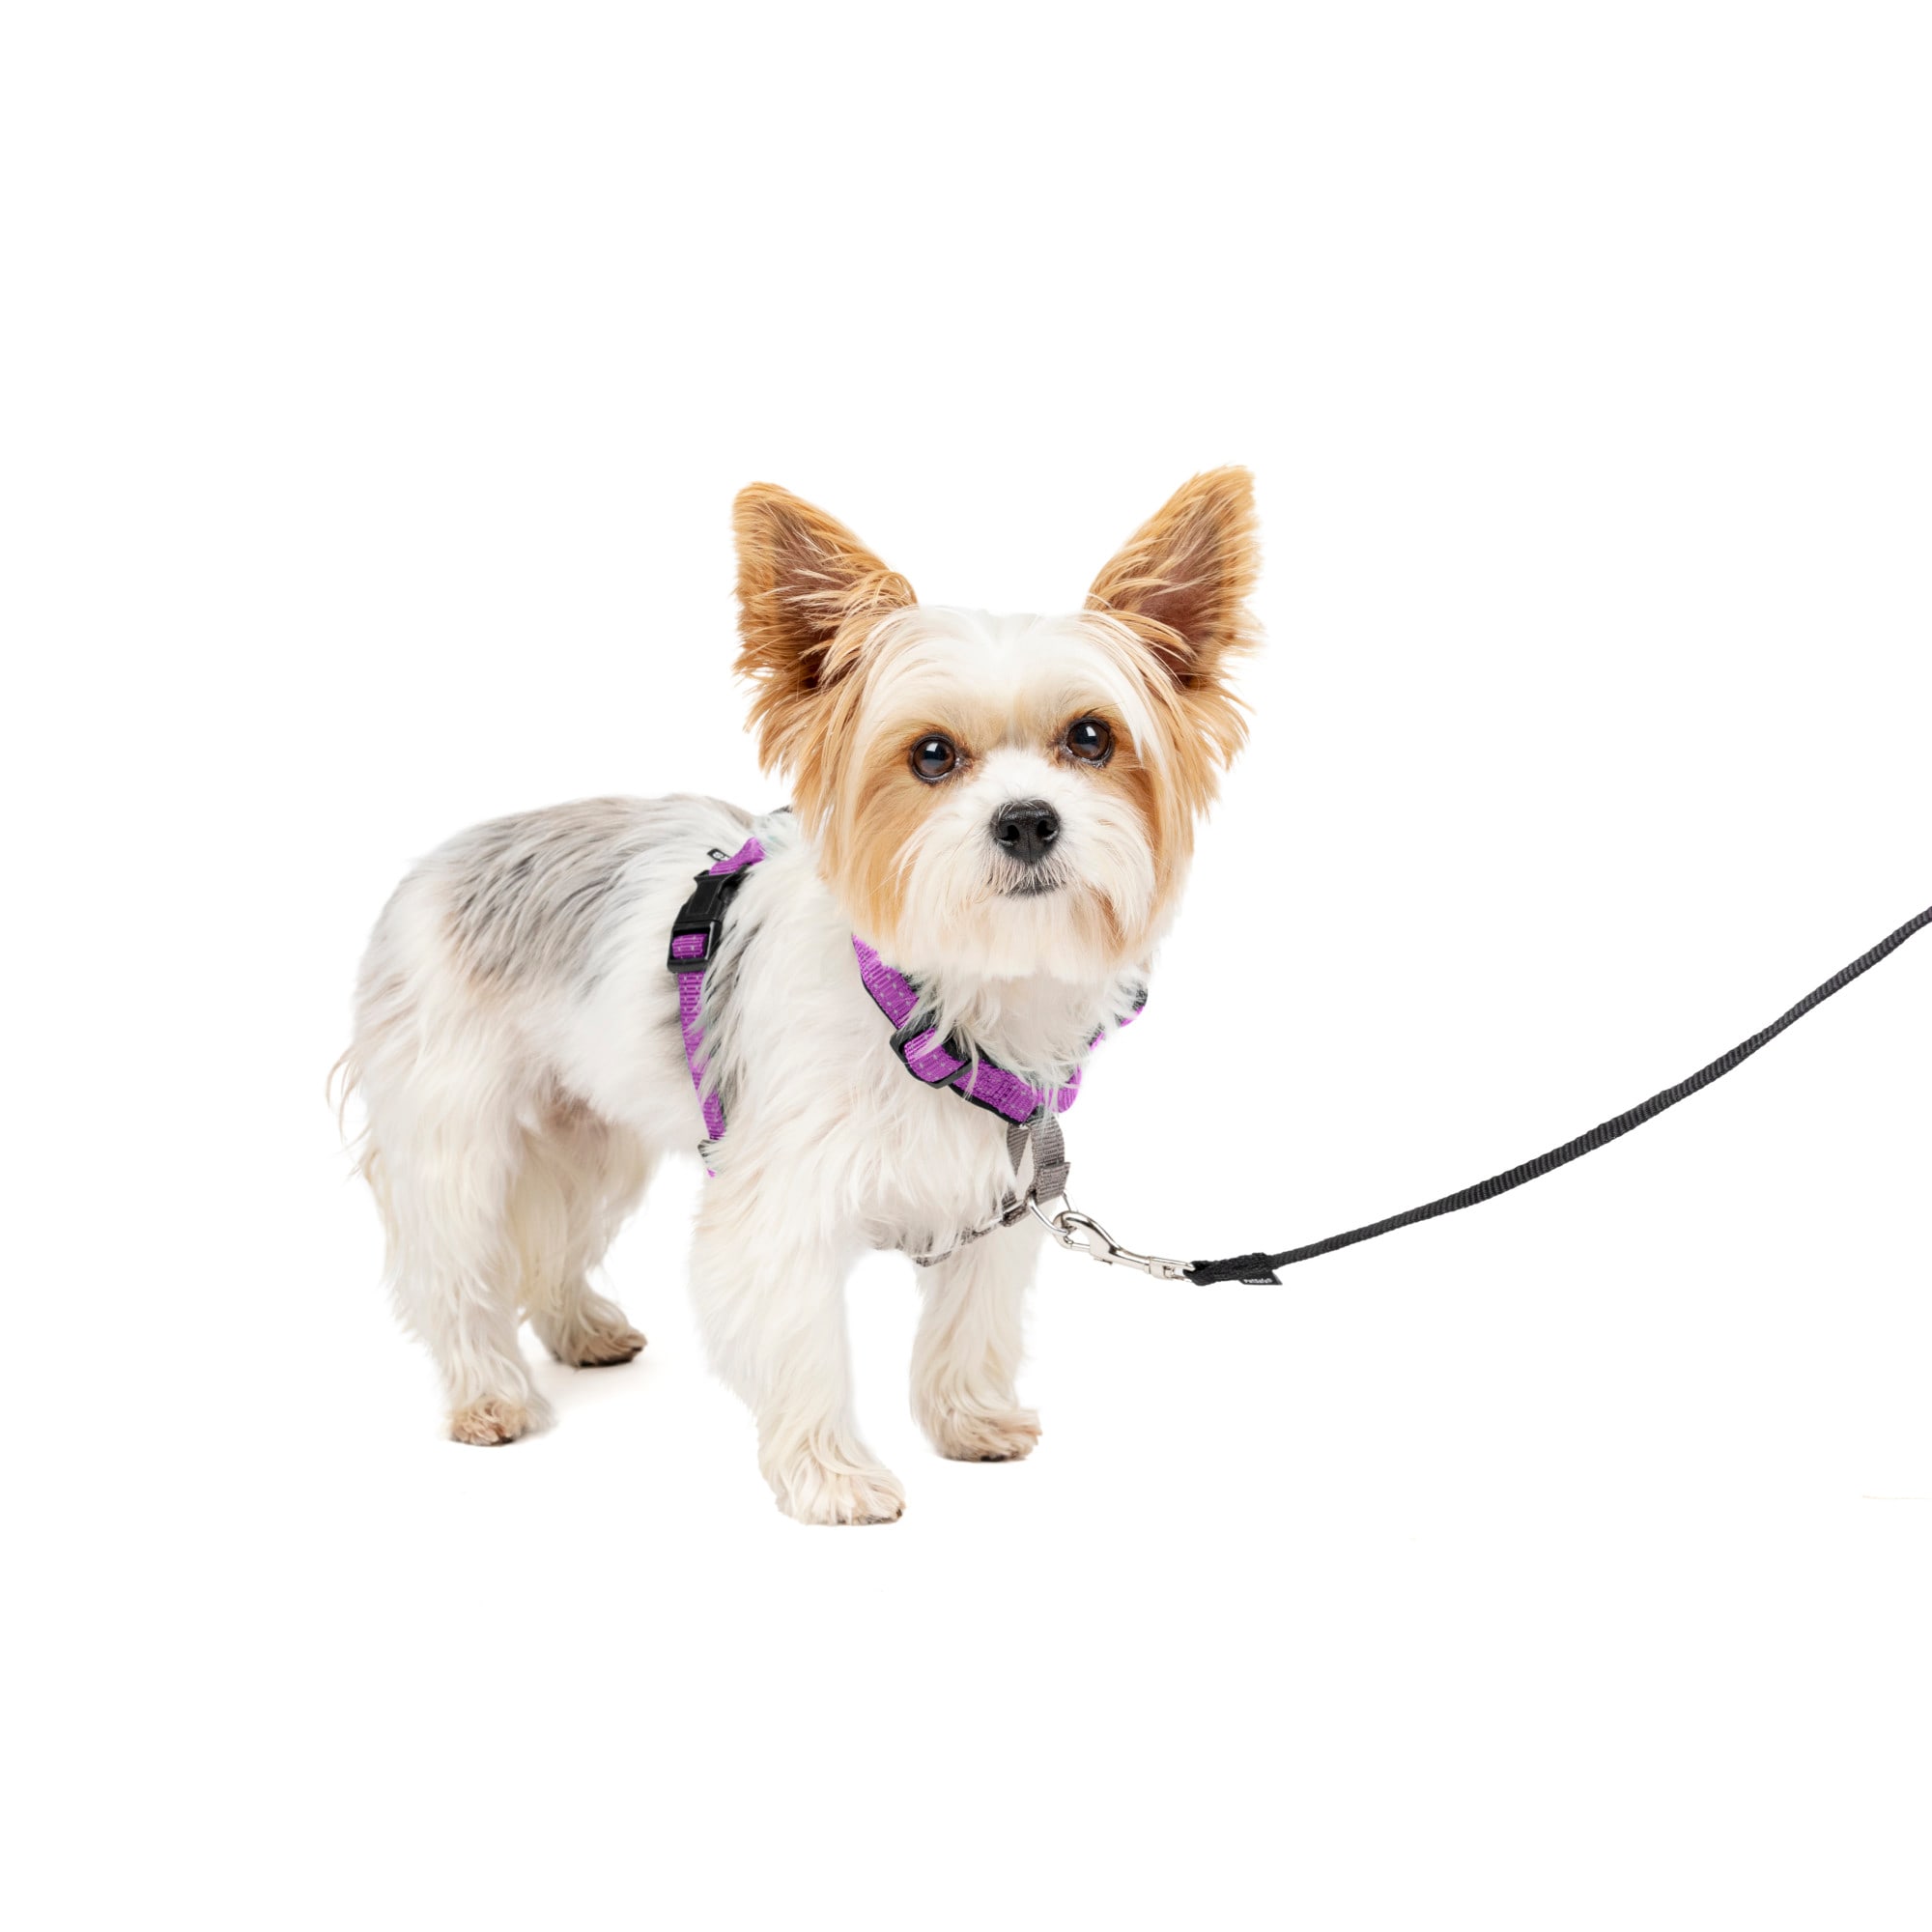 Photos - Collar / Harnesses PetSafe 3 in 1 Harness, Extra Small, Plum, X-Small, Red / Grey 3IN 